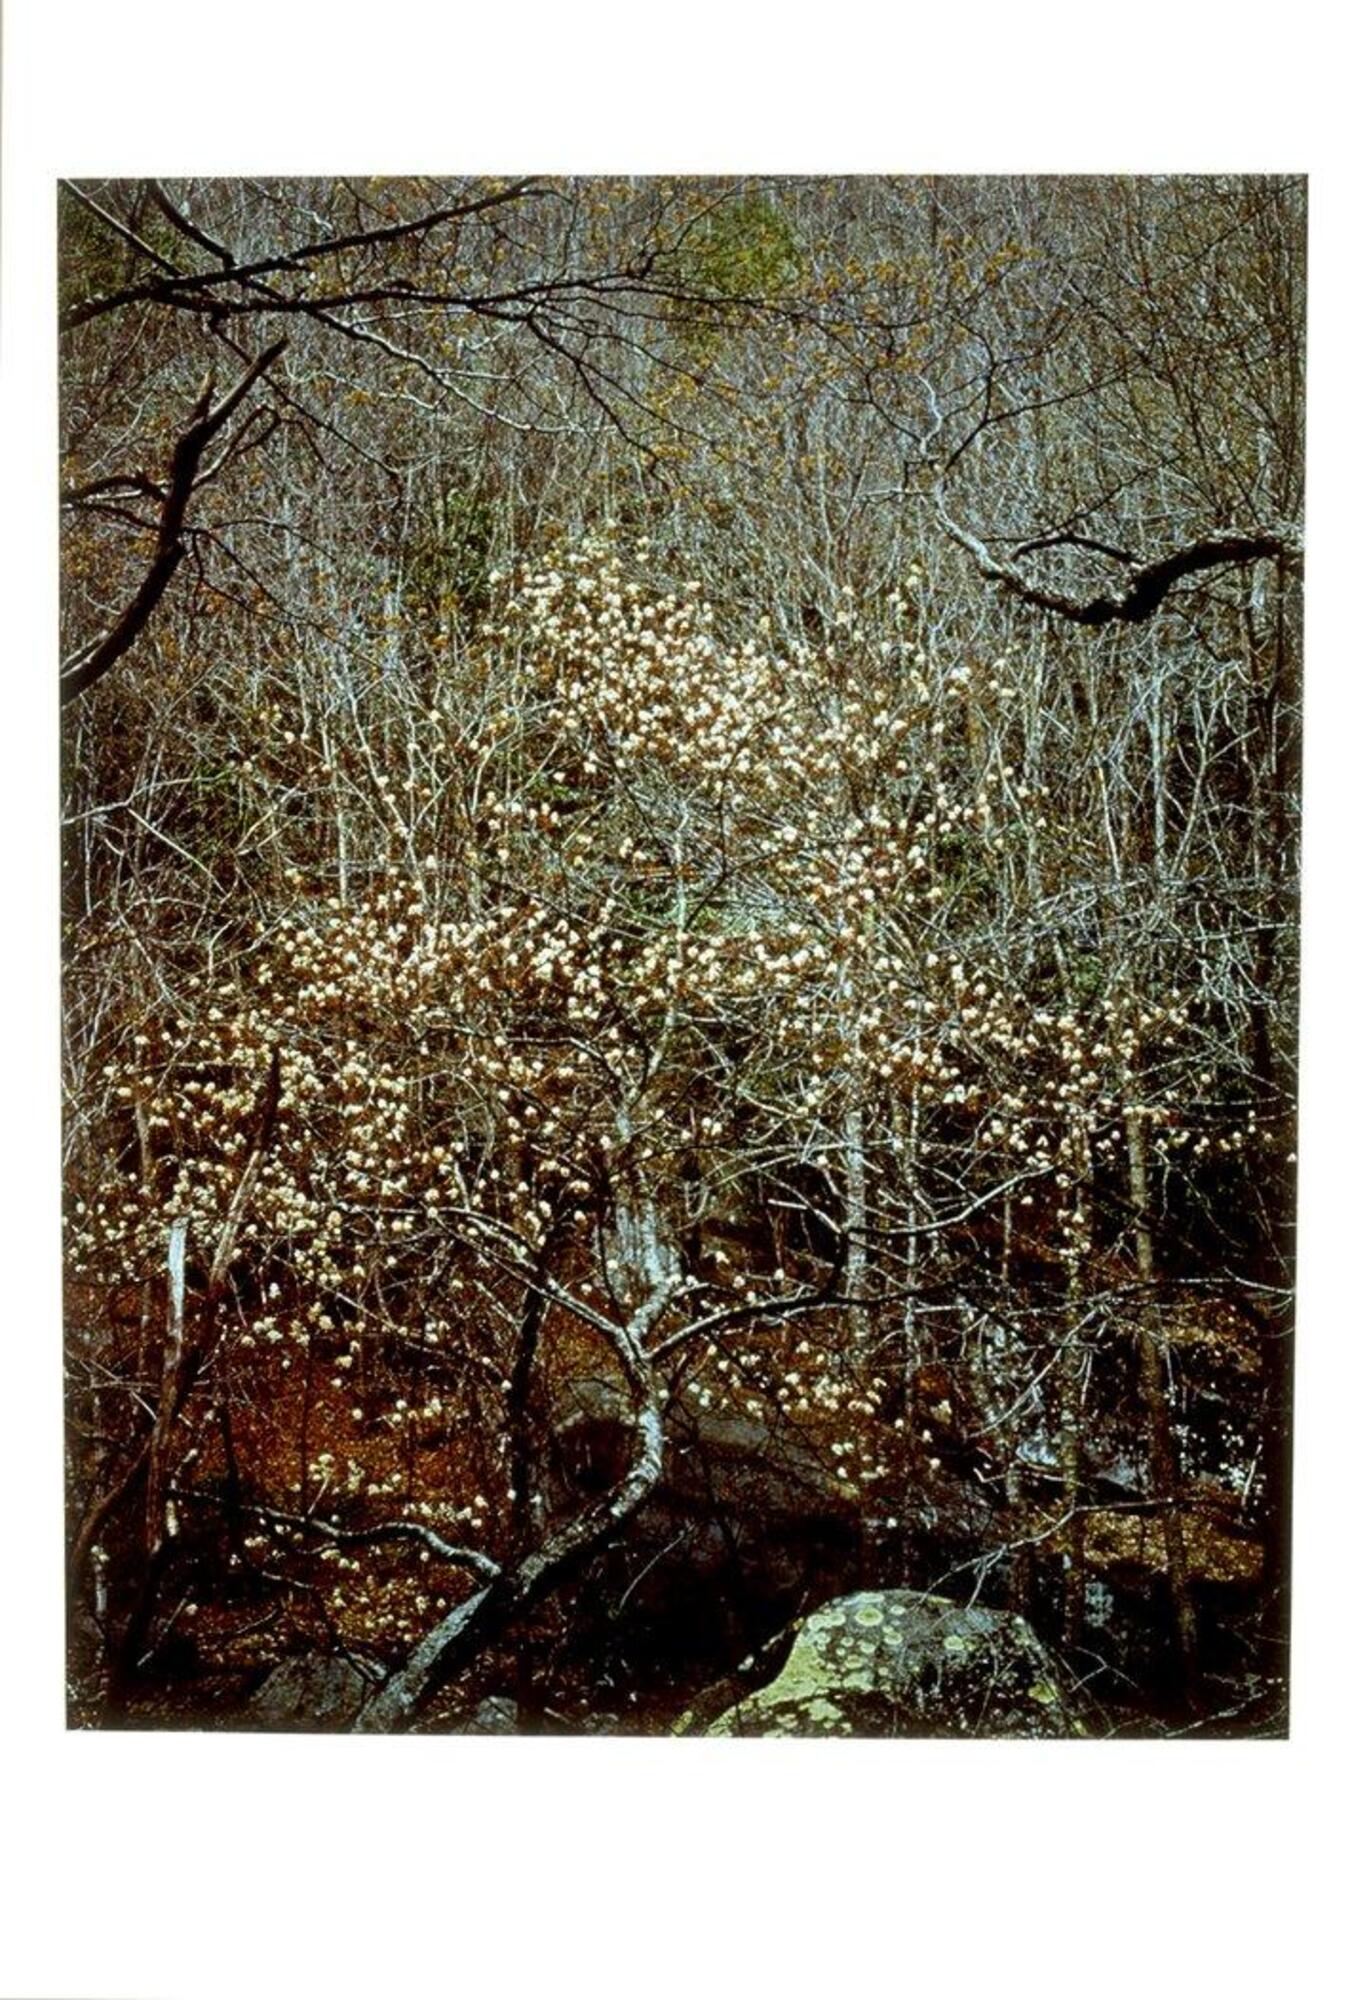 This photograph is of a temperate forest at the beginning of springtime.  A small blooming tree occupies the center of the frame.